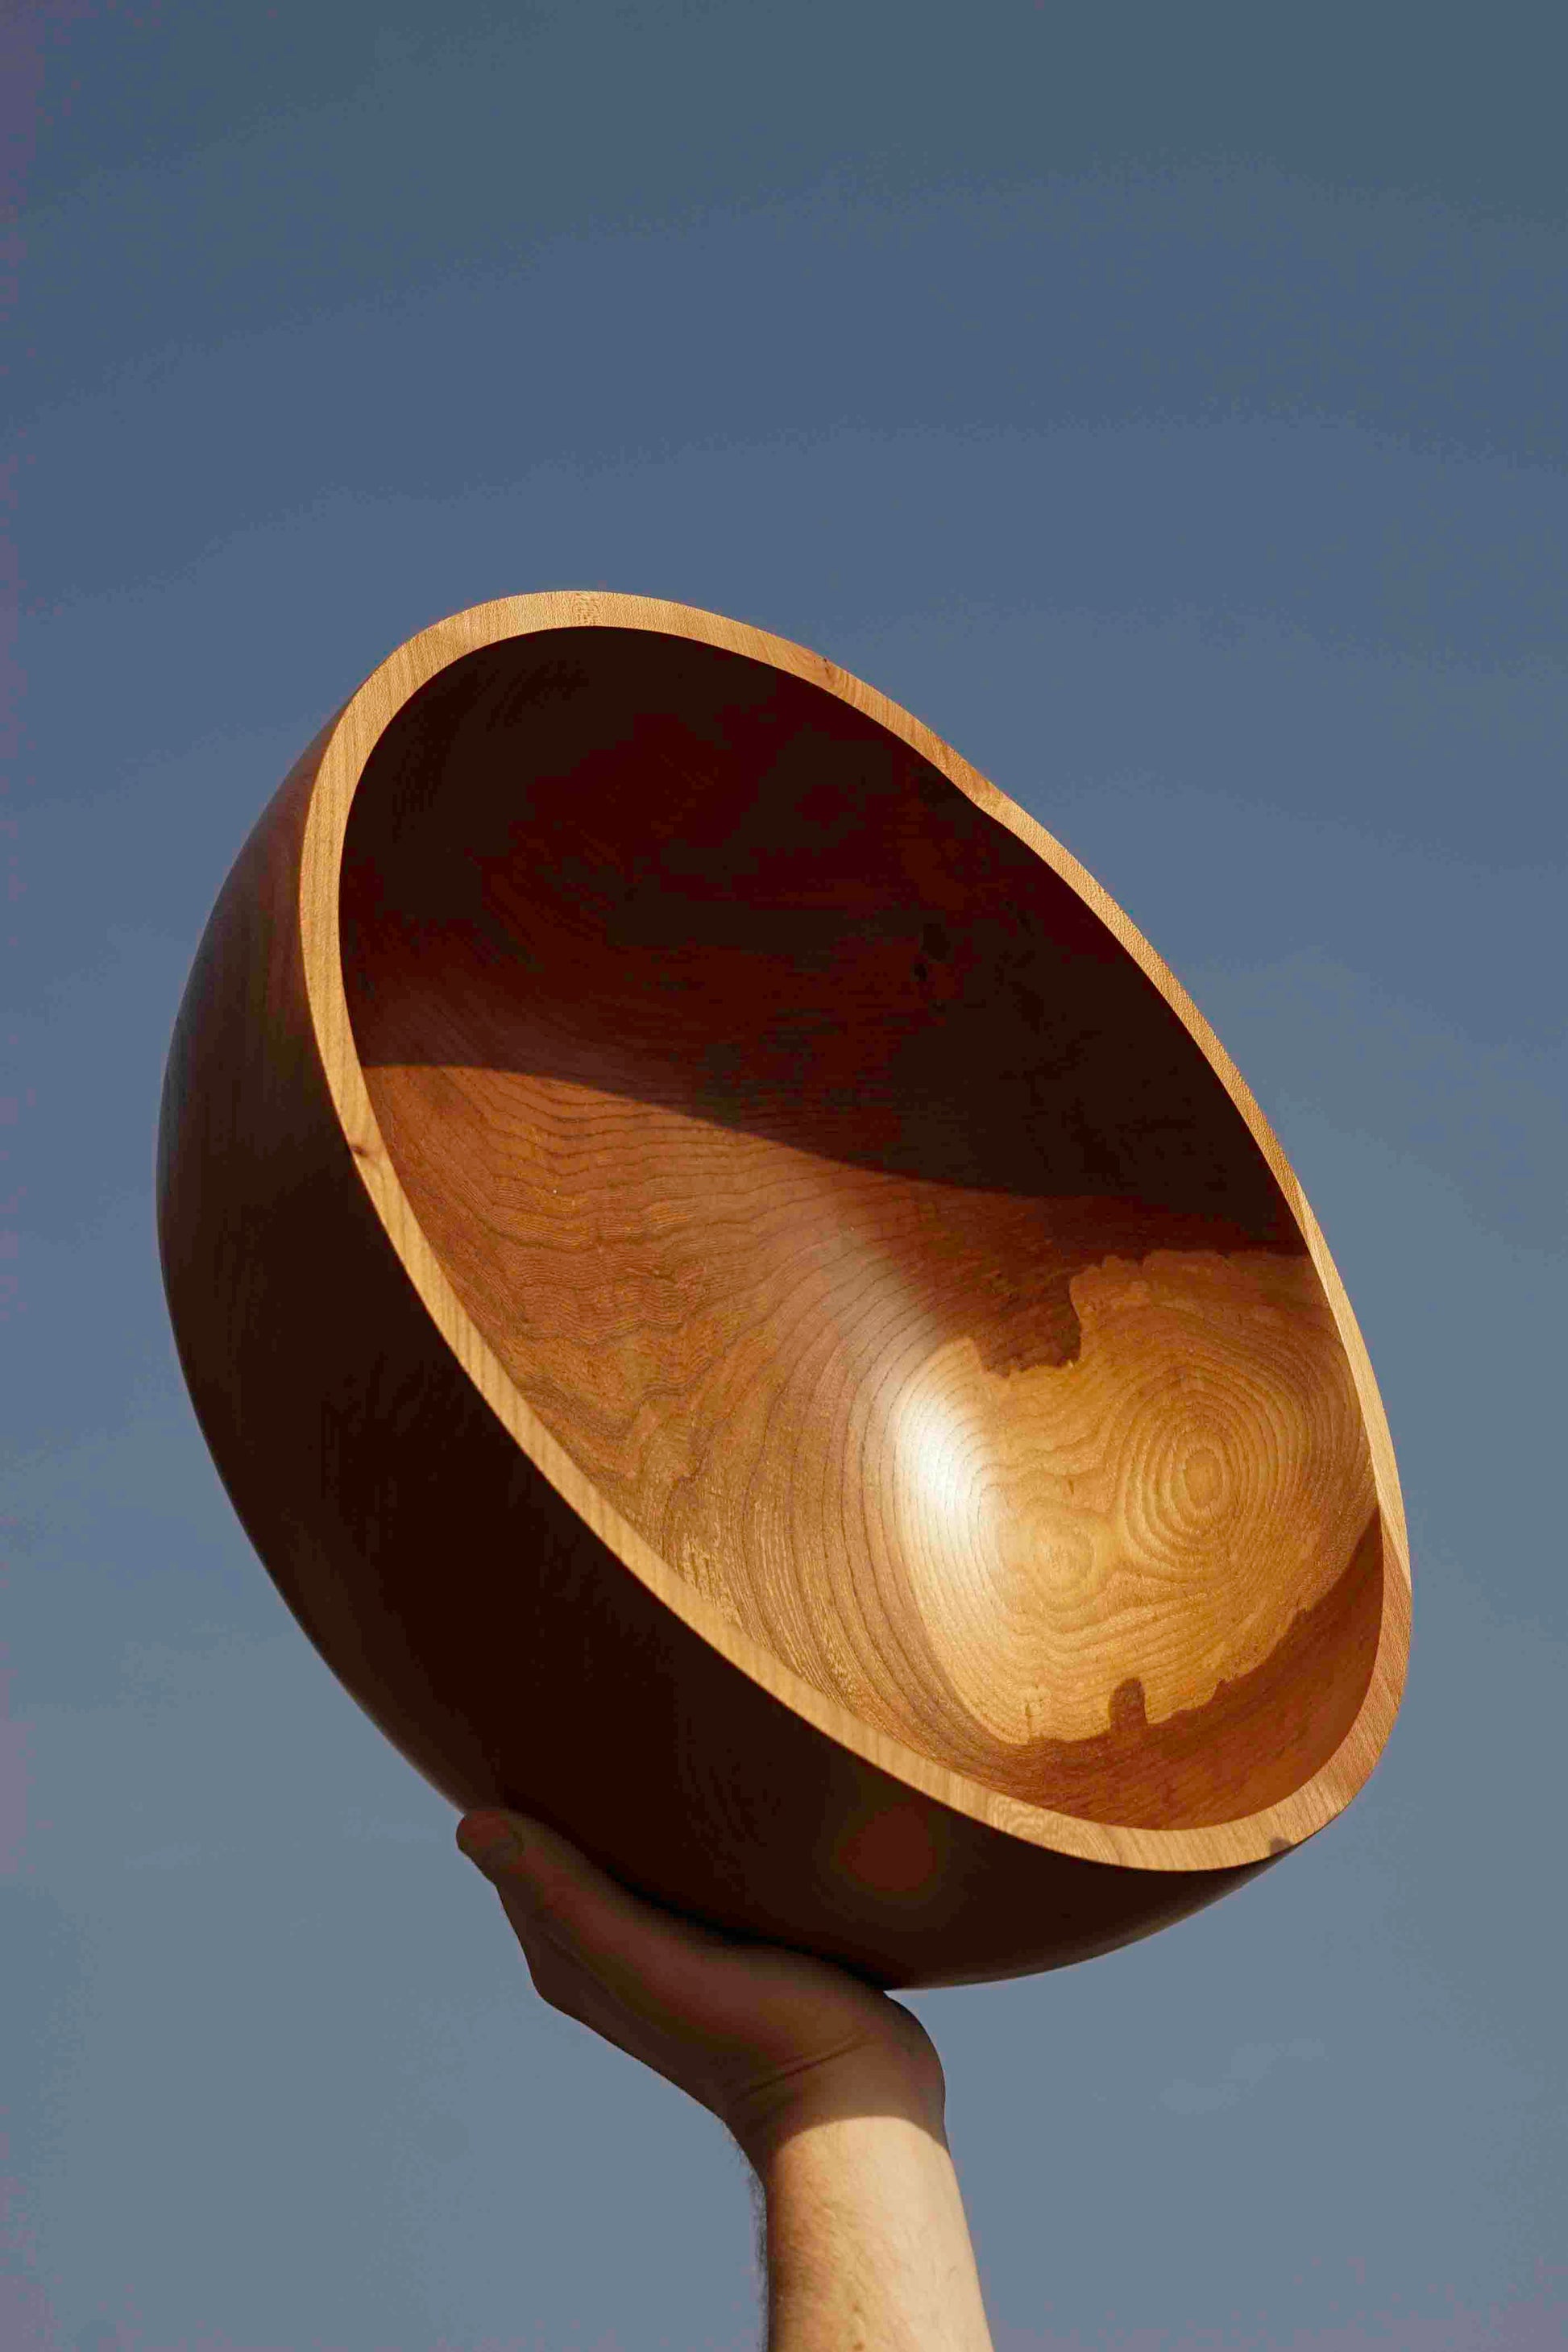 ALT=Jonnie Crawford's Wych Elm bowl. Held in the air by a hand from the bottom of the image. The inside of the bowl faces the sun.